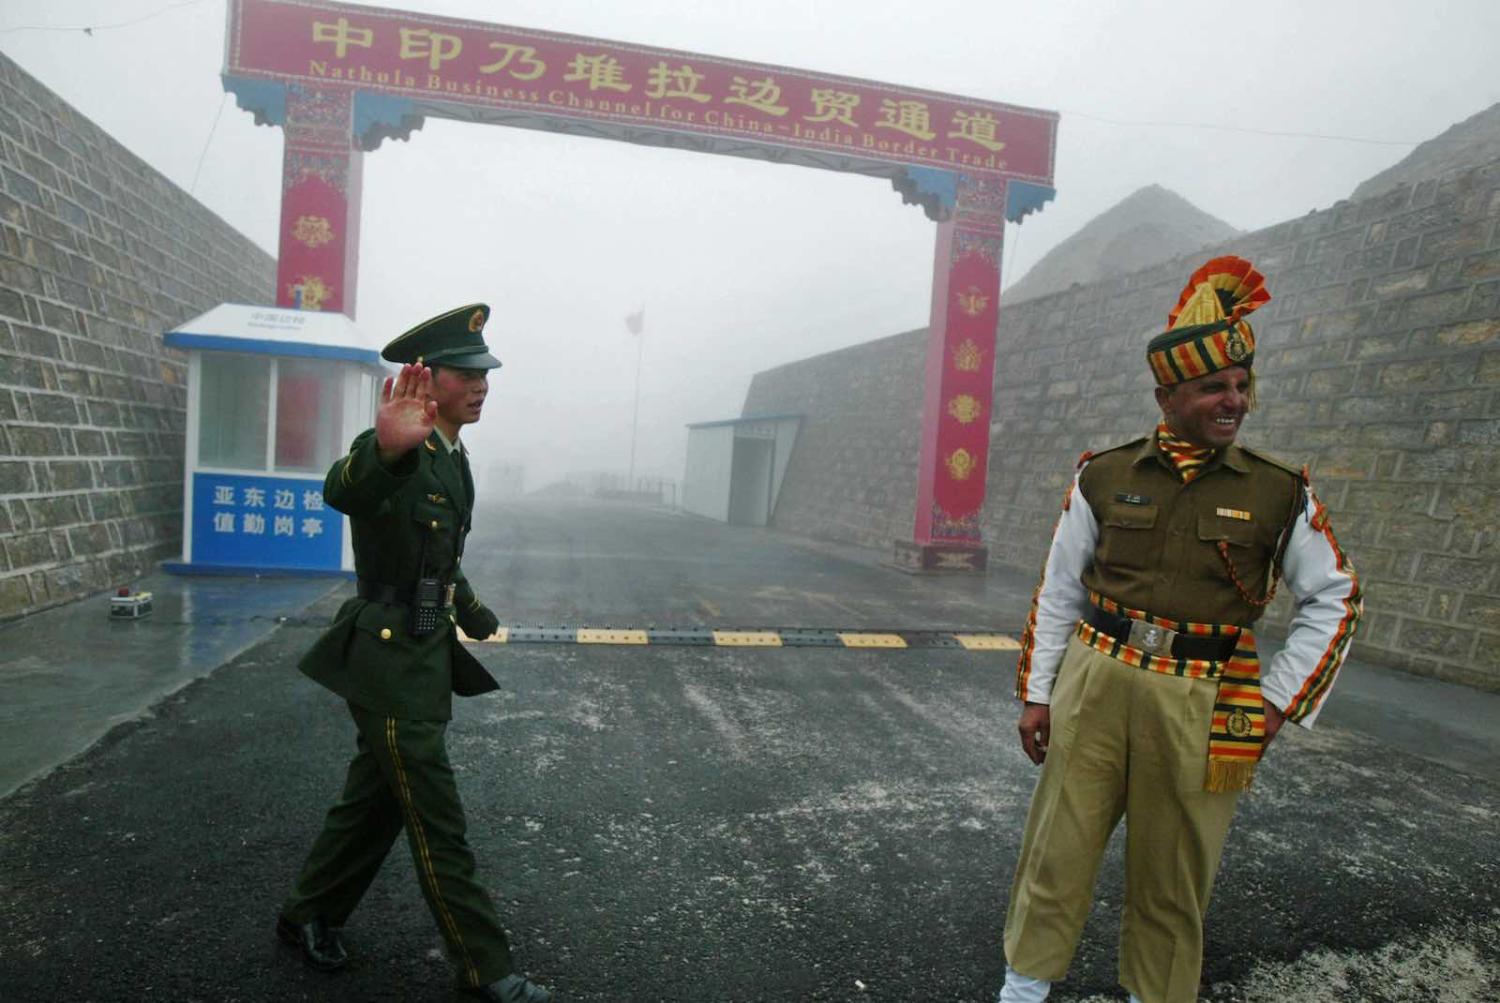 Nathu La border crossing between India and China (Diptendu Dutta/AFP via Getty Images)